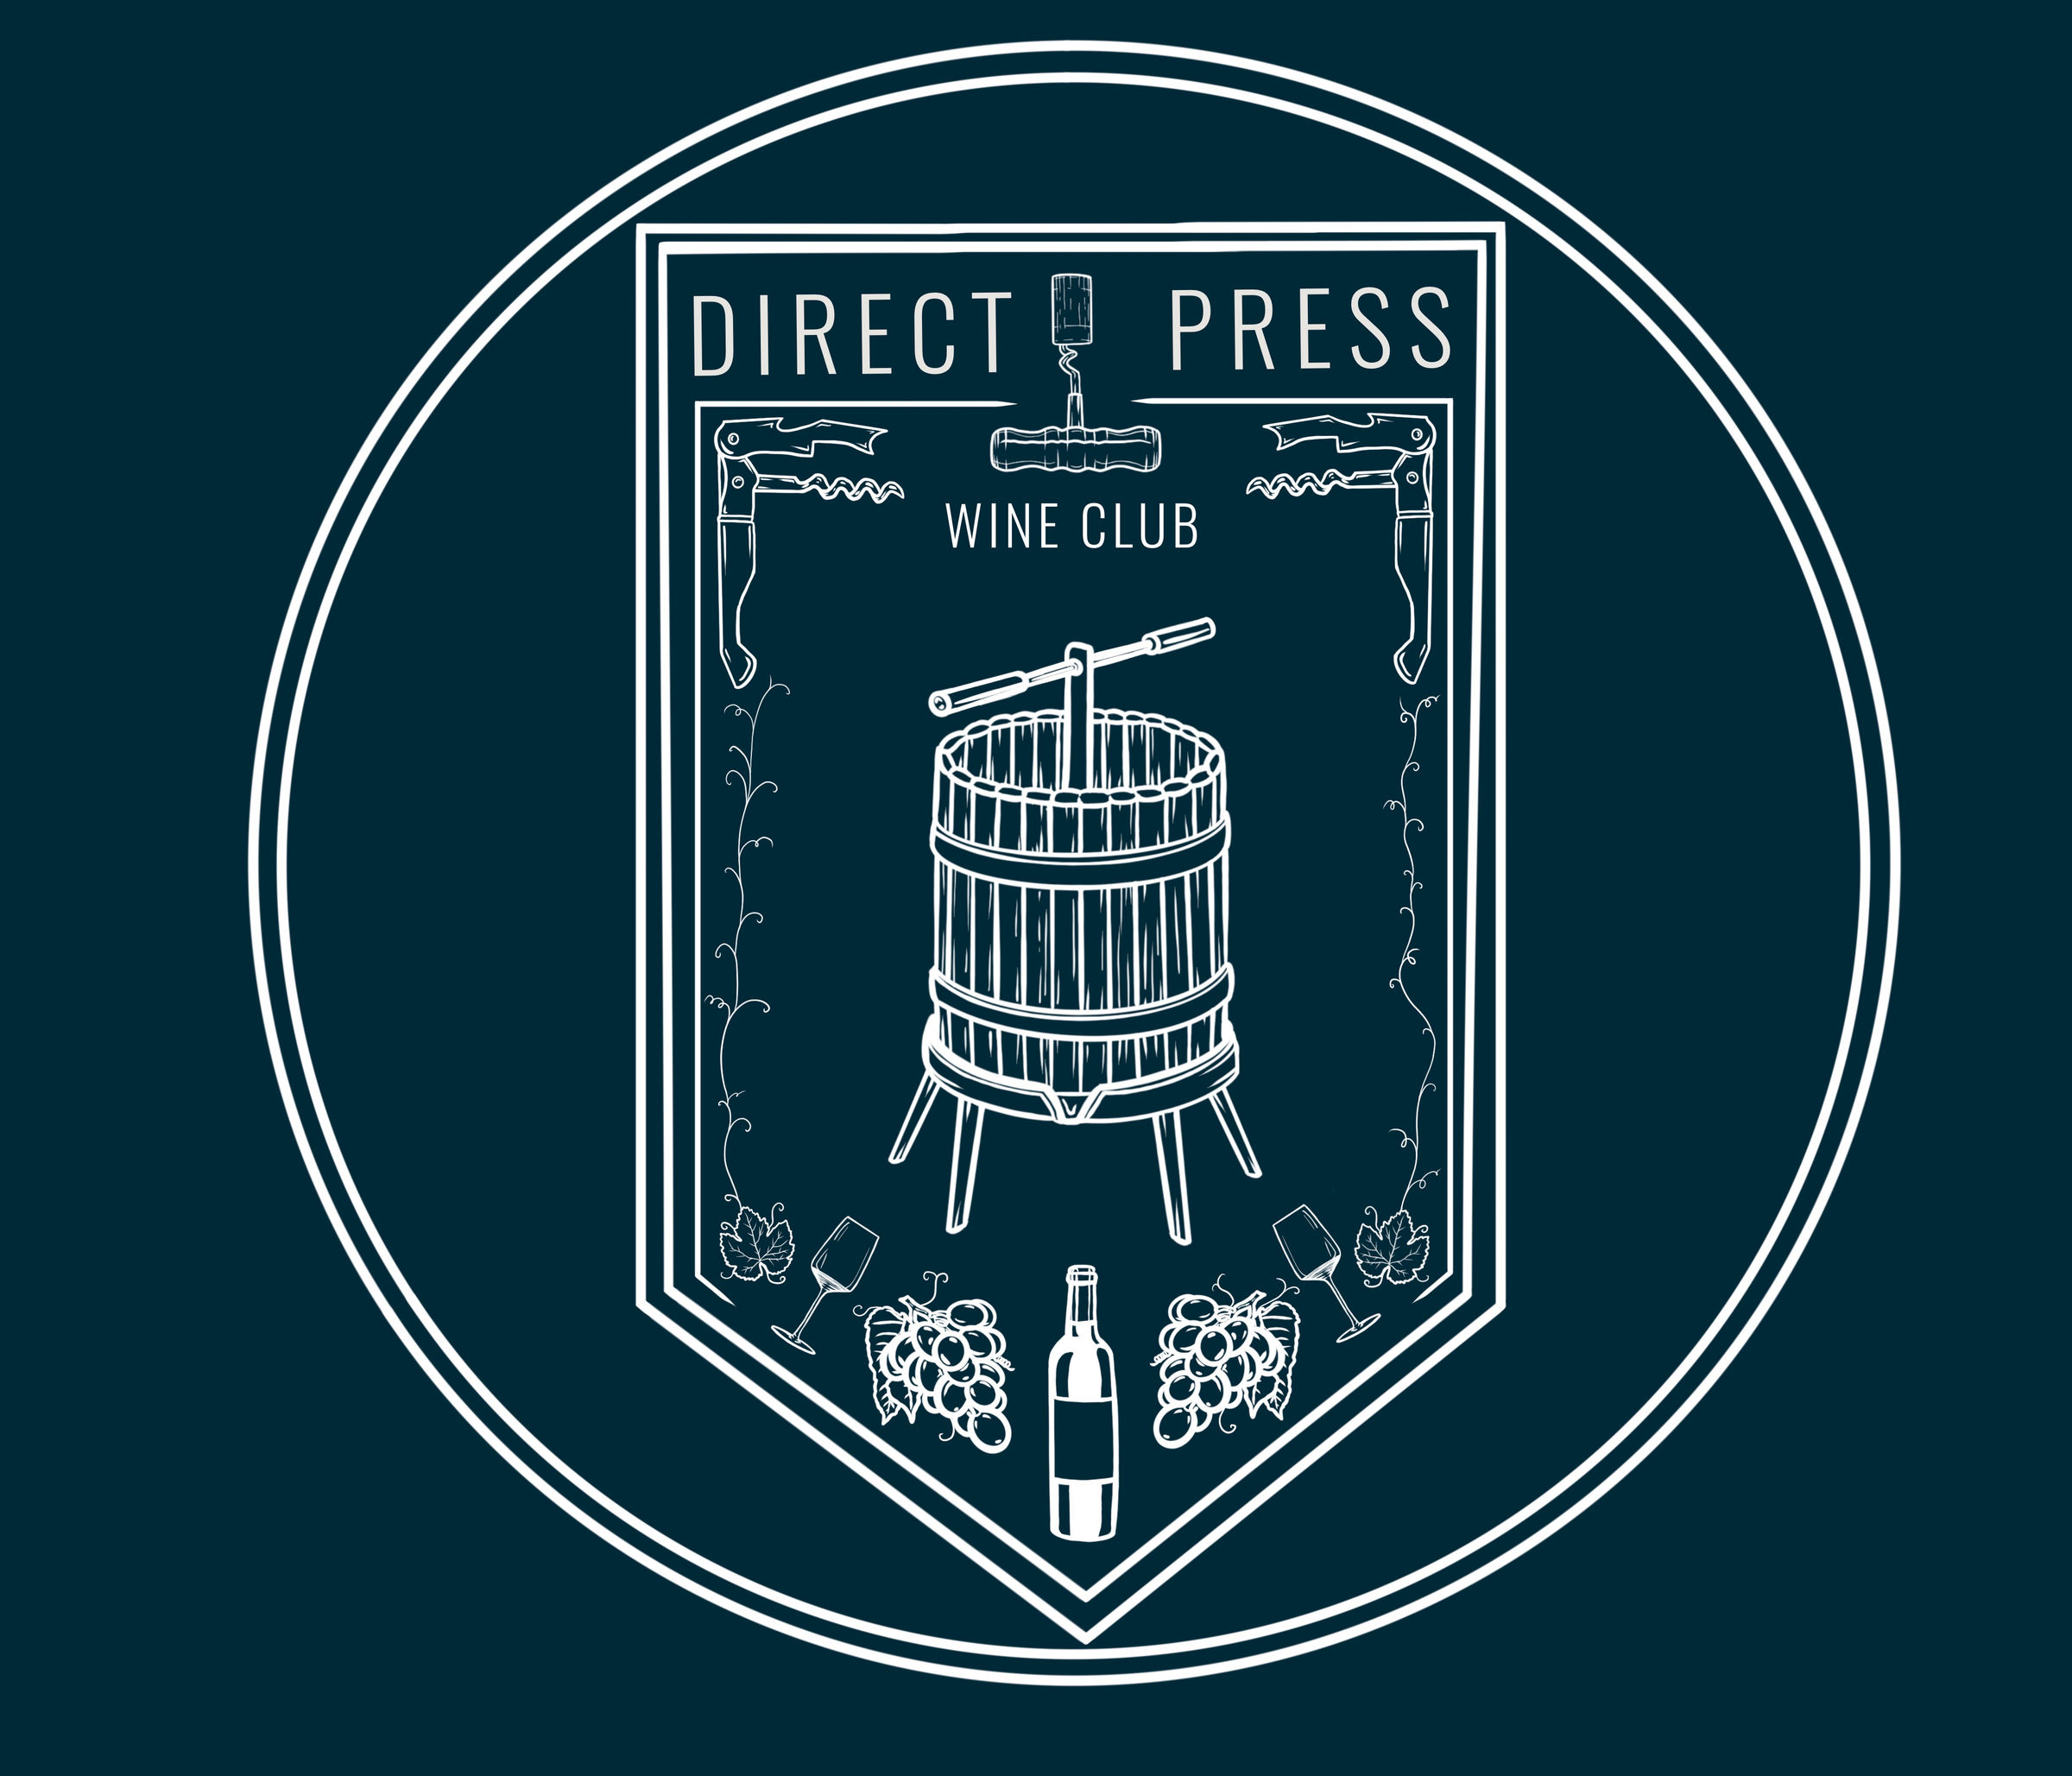 GIVE THE GIFT OF DIRECT PRESS